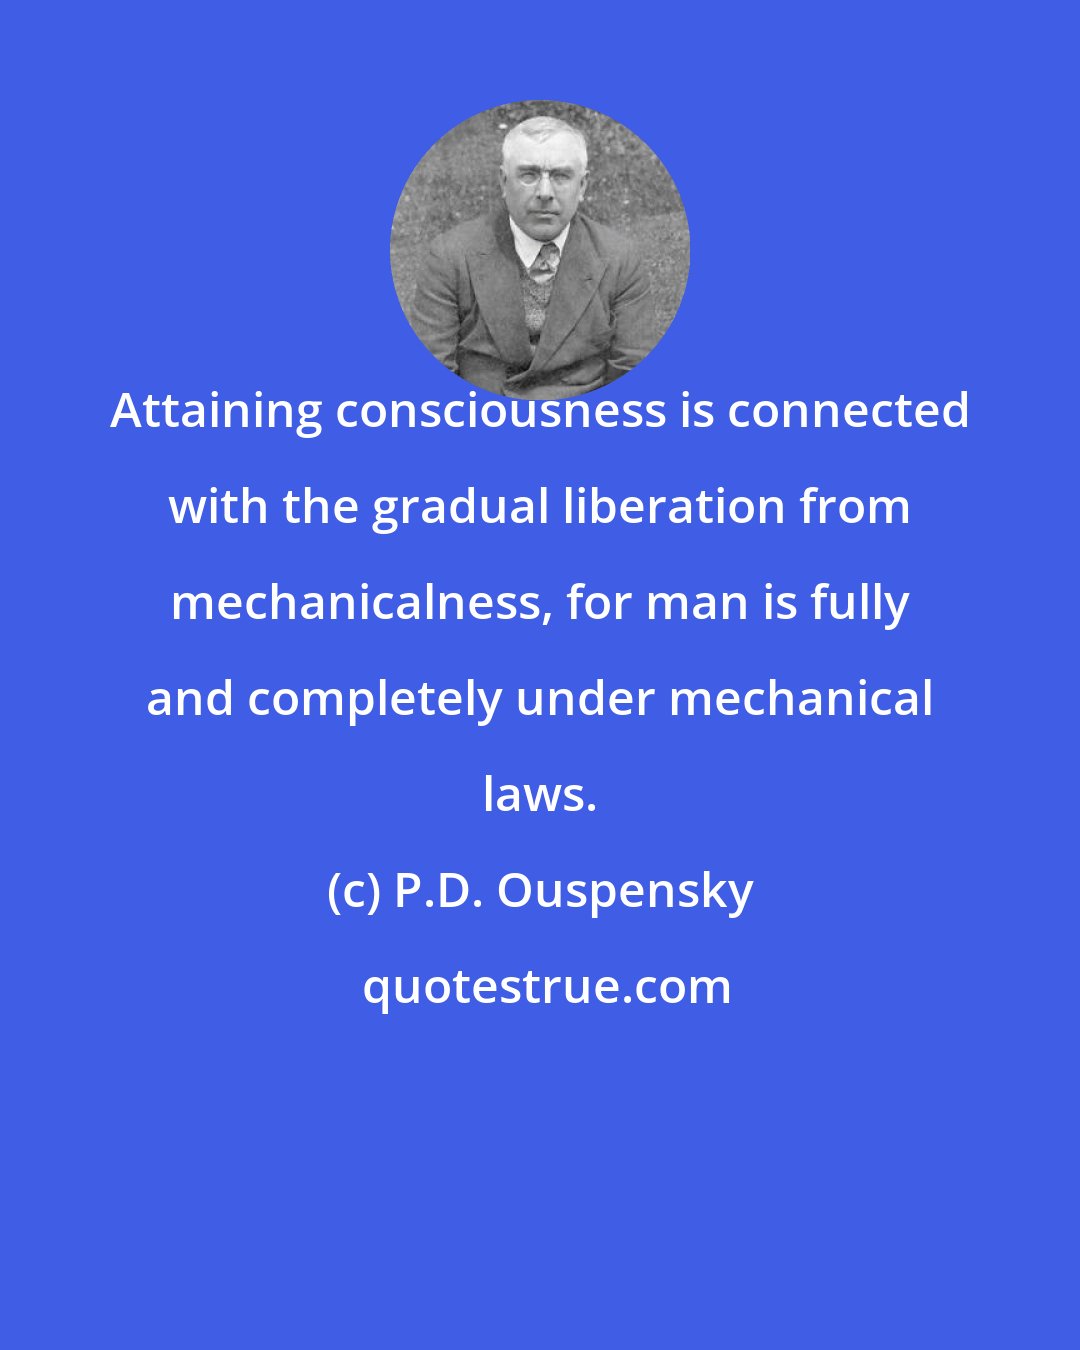 P.D. Ouspensky: Attaining consciousness is connected with the gradual liberation from mechanicalness, for man is fully and completely under mechanical laws.